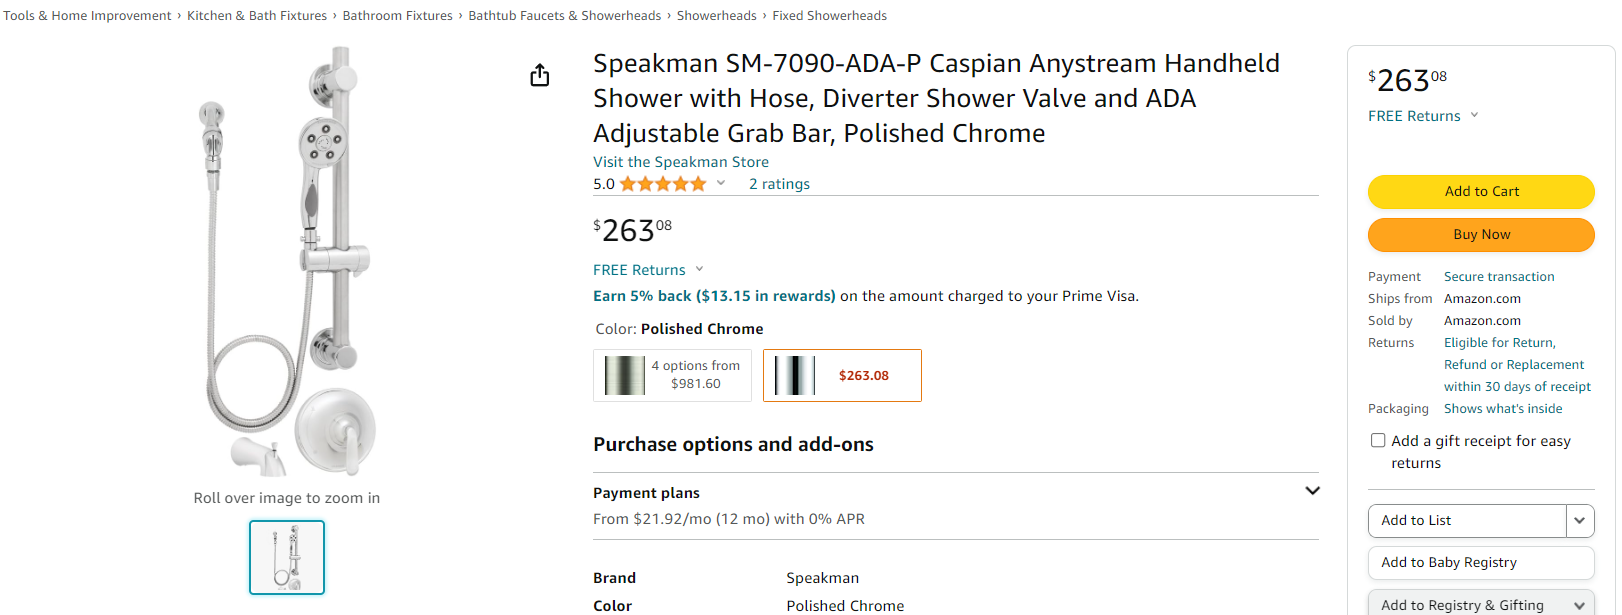 Speakman Caspian Anystream Handheld Shower (Polished Chrome) for $263.08 with Free Shipping at Amazon